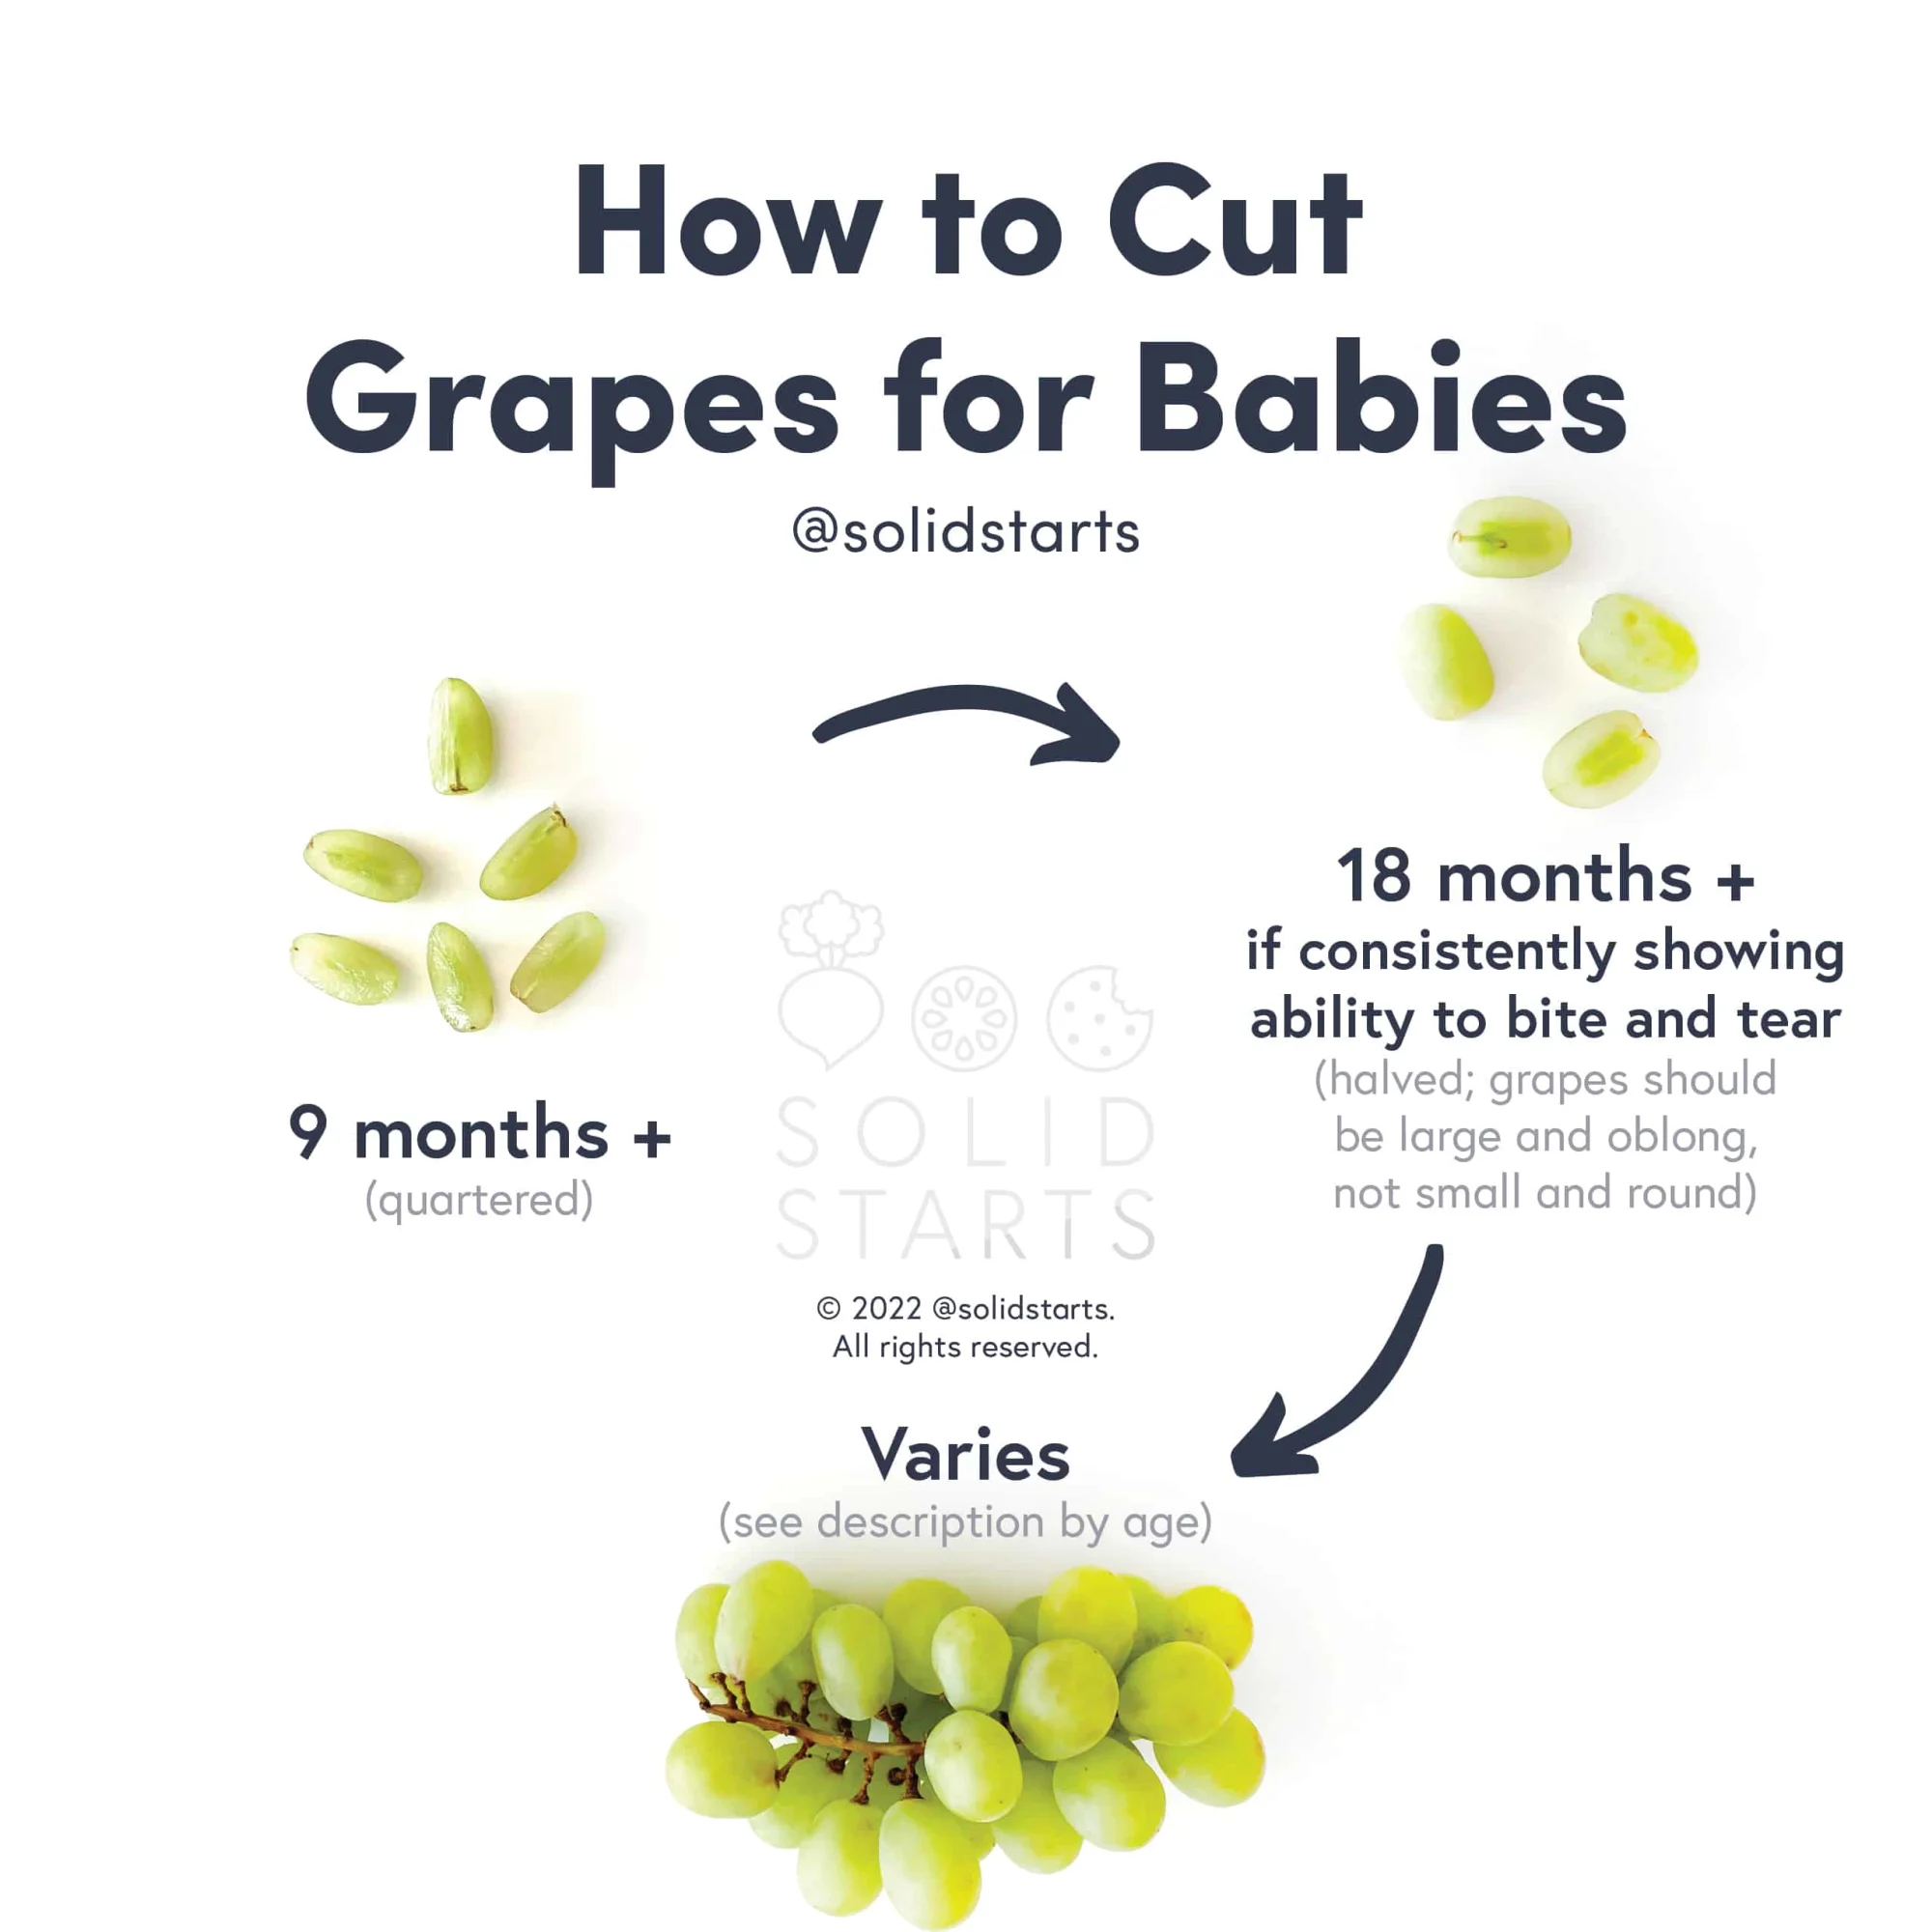 a Solid Starts infographic with the header "How to Cut Grapes for Babies": quartered for 9 mos+, halved for 18 mos+ if consistently showing mature biting and chewing skills, and varies for whole grapes on stem